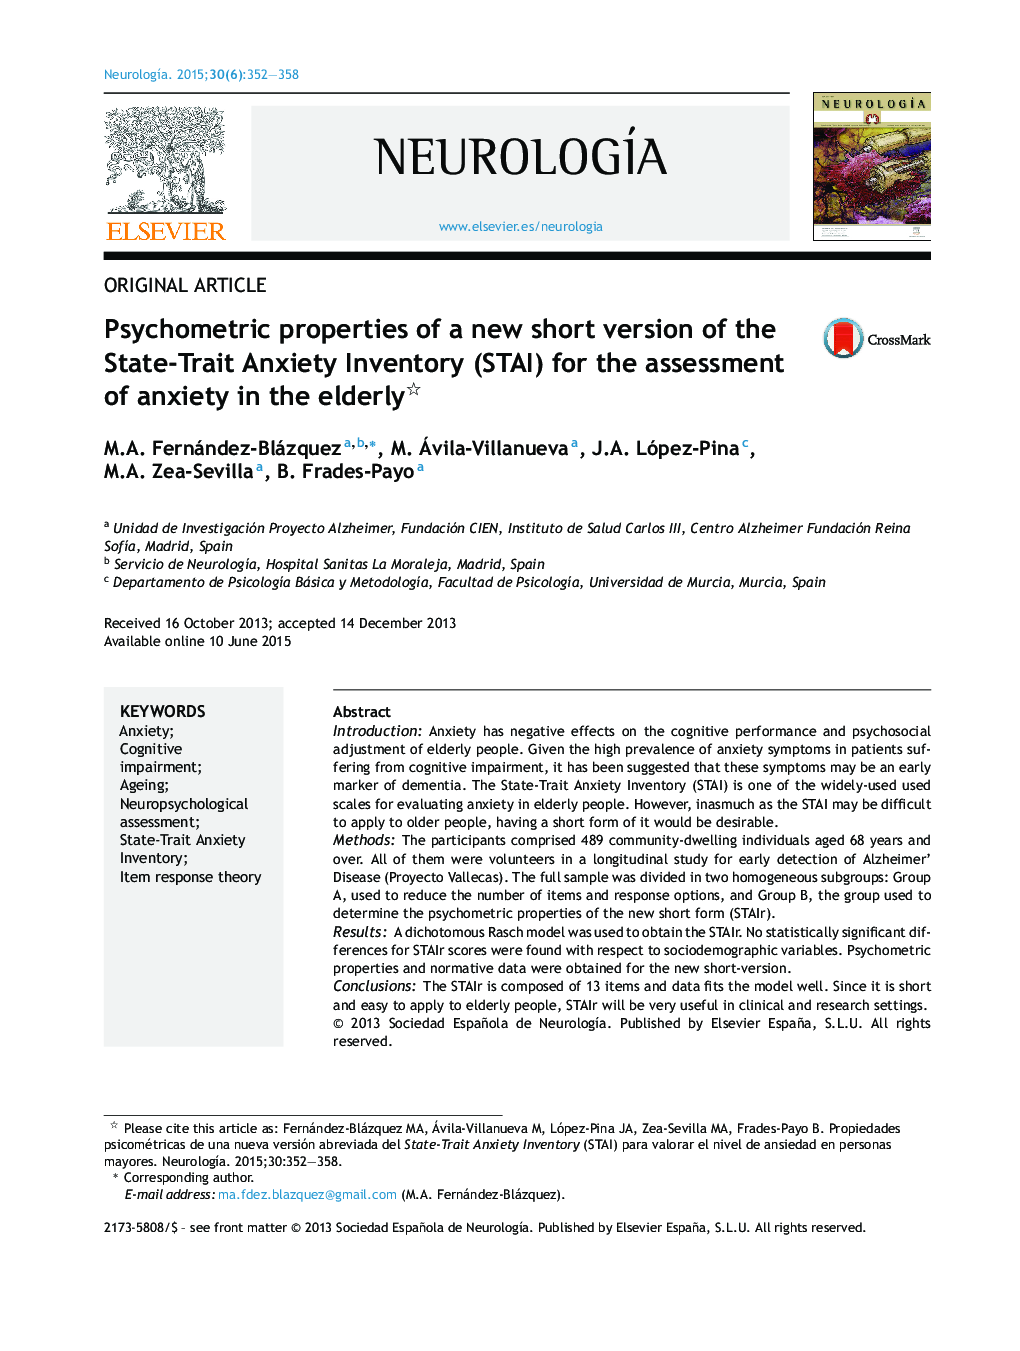 Psychometric properties of a new short version of the State-Trait Anxiety Inventory (STAI) for the assessment of anxiety in the elderly 